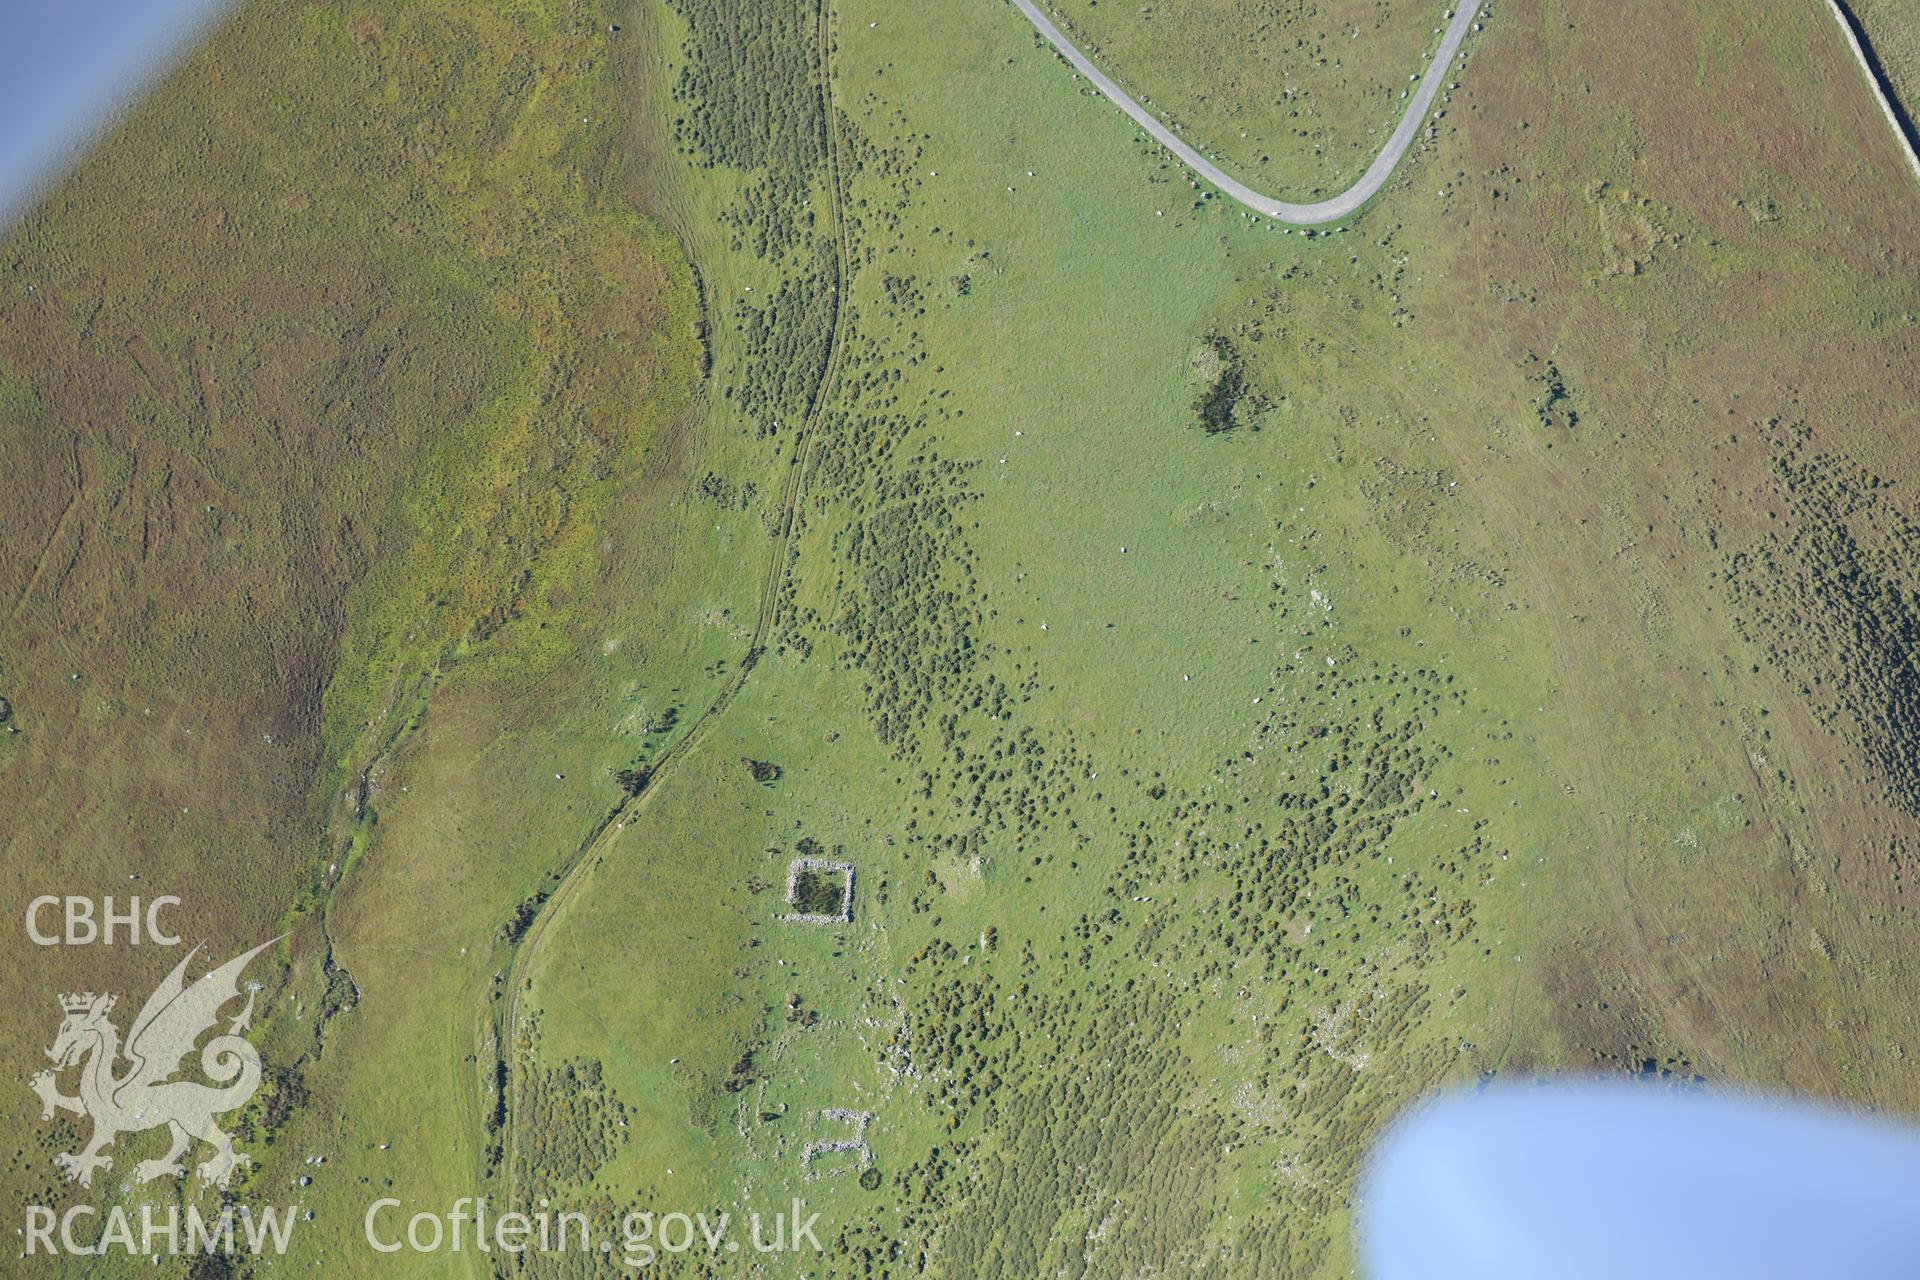 Ruined building and sheepfold east of Hafoty Fach near Llynnau Cregennen, Cadair Idris. Oblique aerial photograph taken during the Royal Commission's programme of archaeological aerial reconnaissance by Toby Driver on 2nd October 2015.